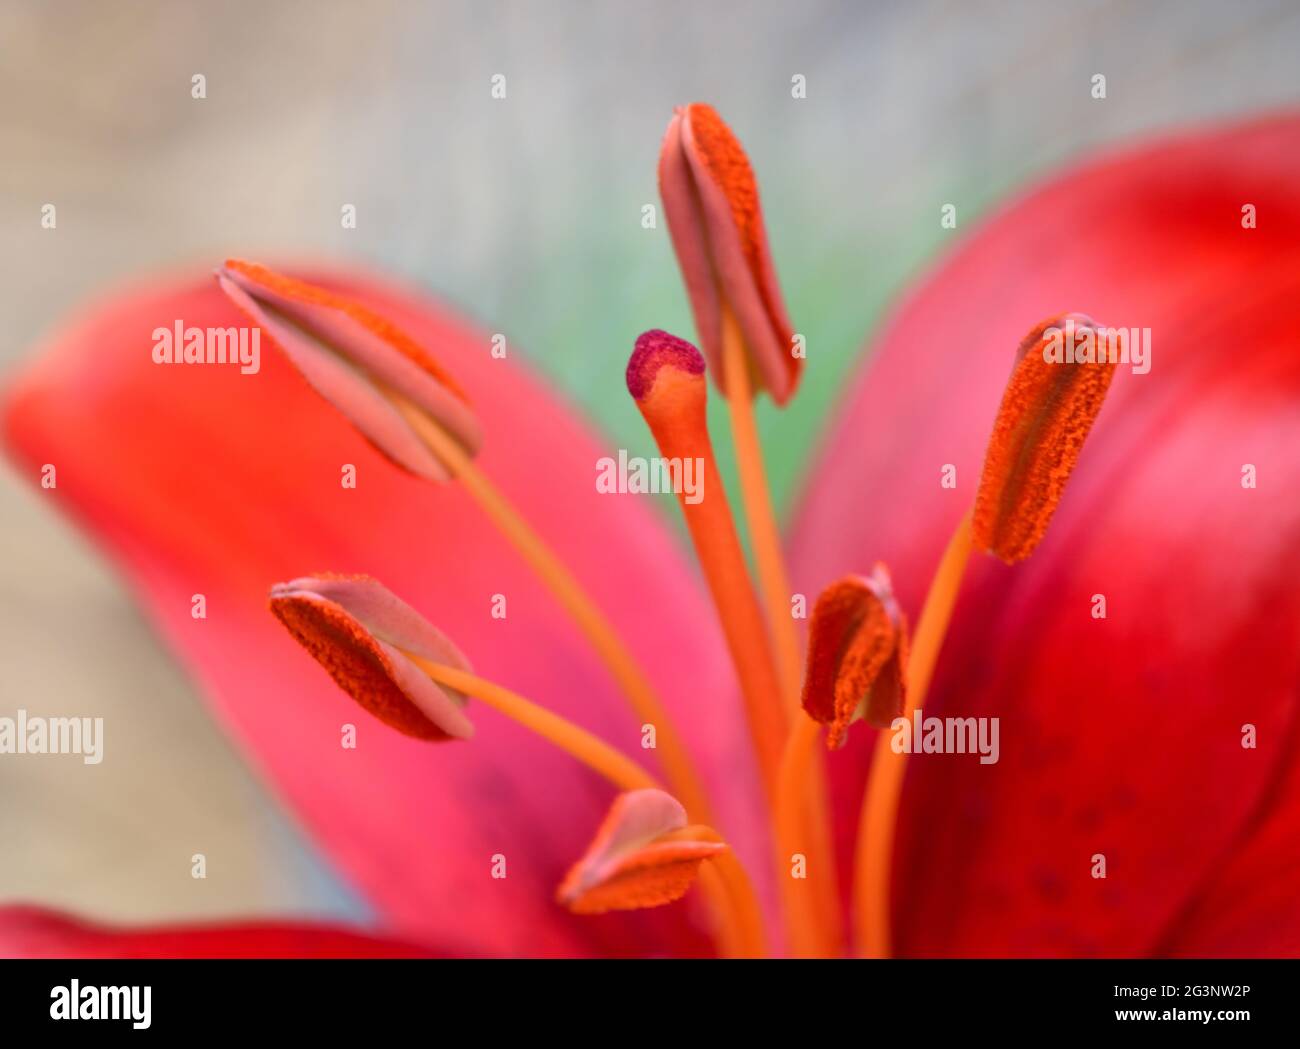 Close up image of the flower parts (stamens, stigma, style) of a red Asiatic lily (Lilium) Stock Photo